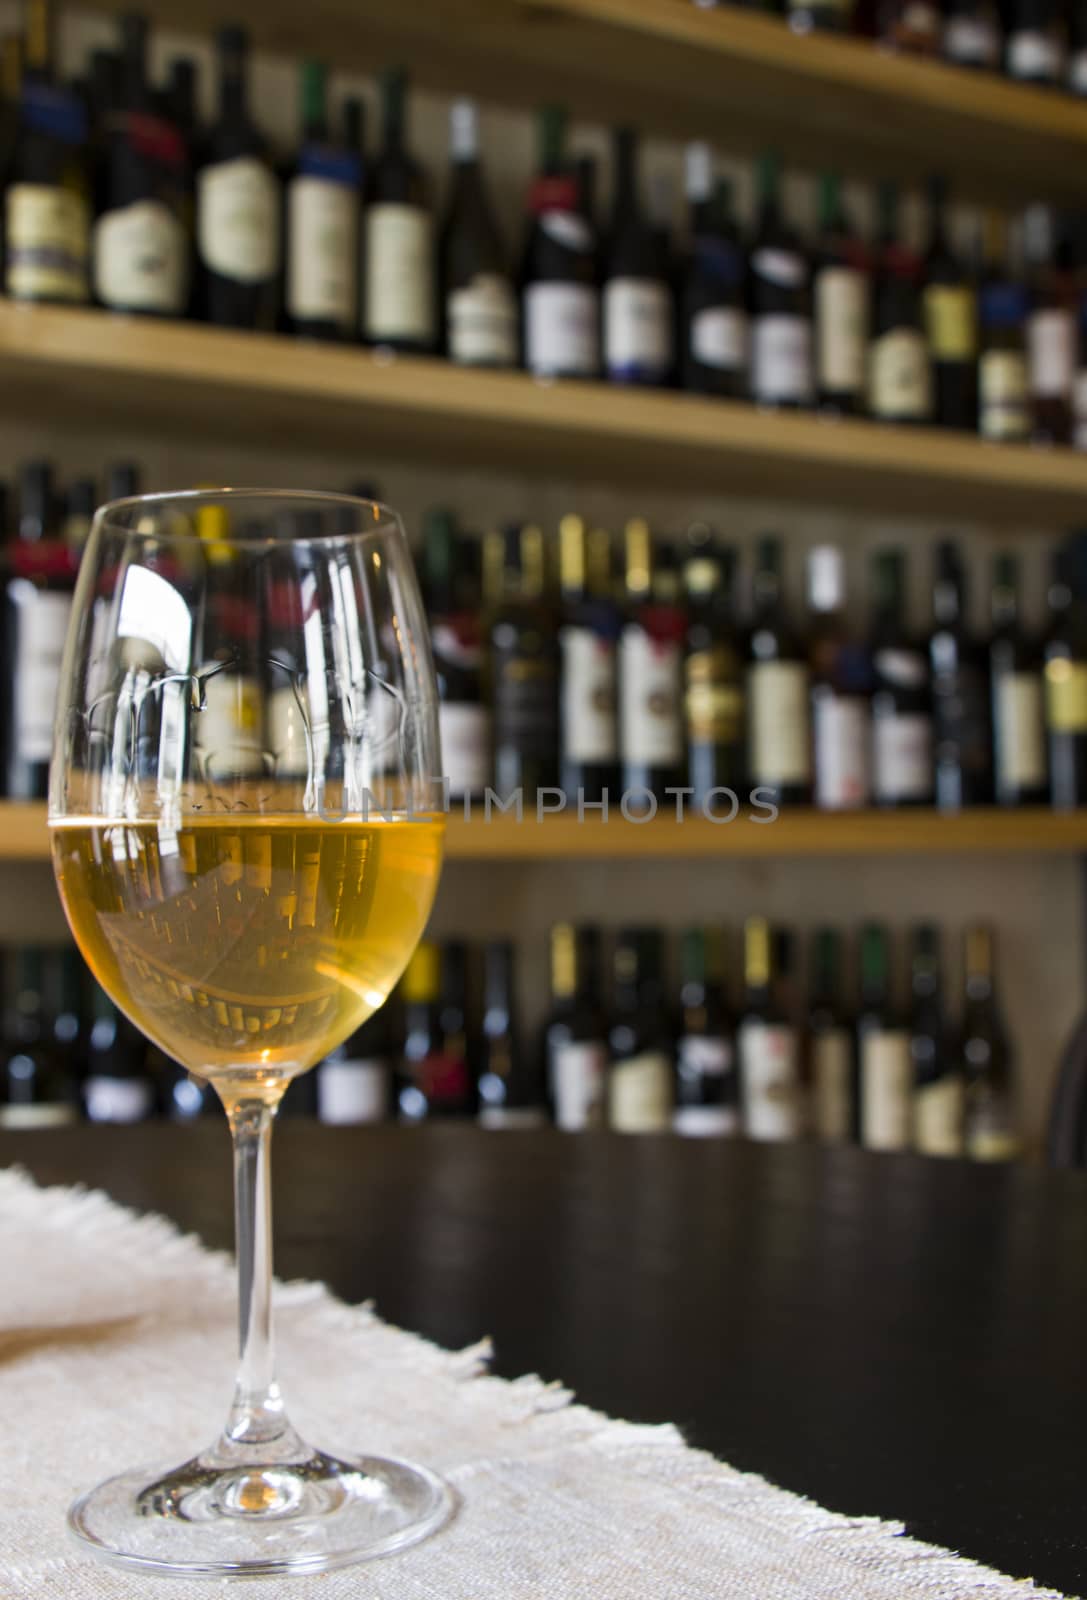 Full white wine glass on the table, wine bottle background, wine magazine and shop in restaurant and bar. Georgian wine in Tbilisi.